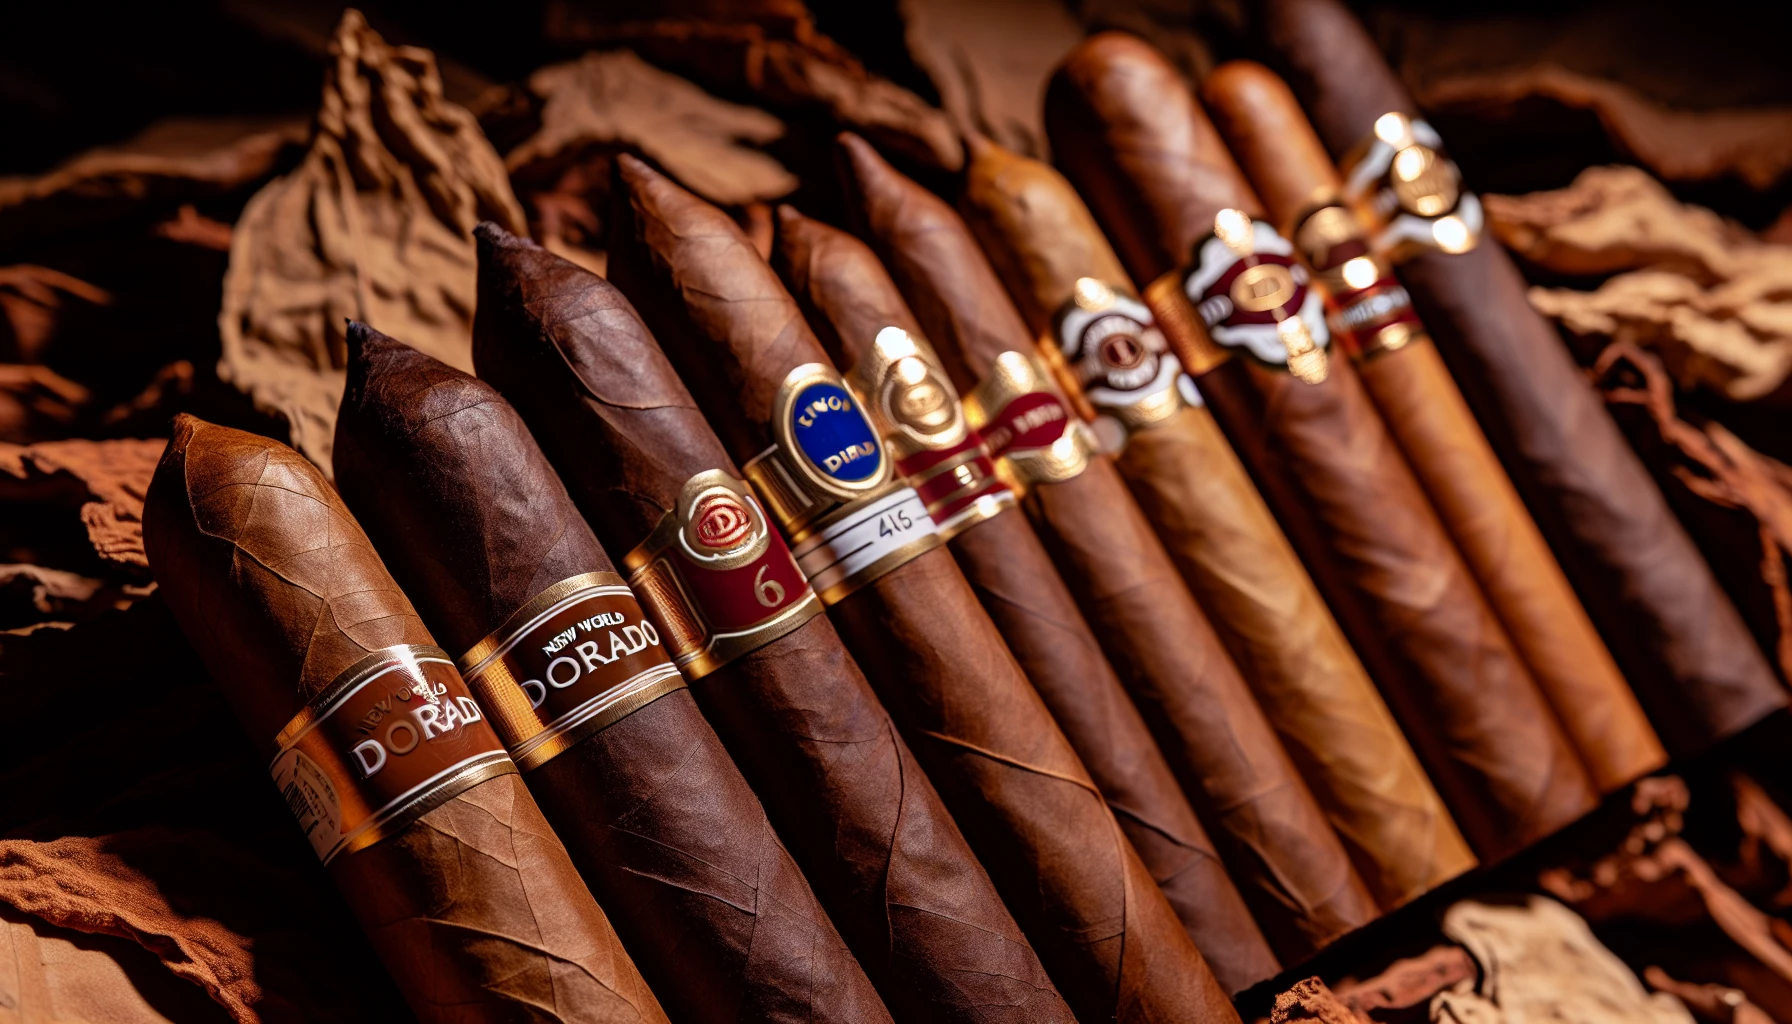 A variety of New World Dorado cigars in different sizes